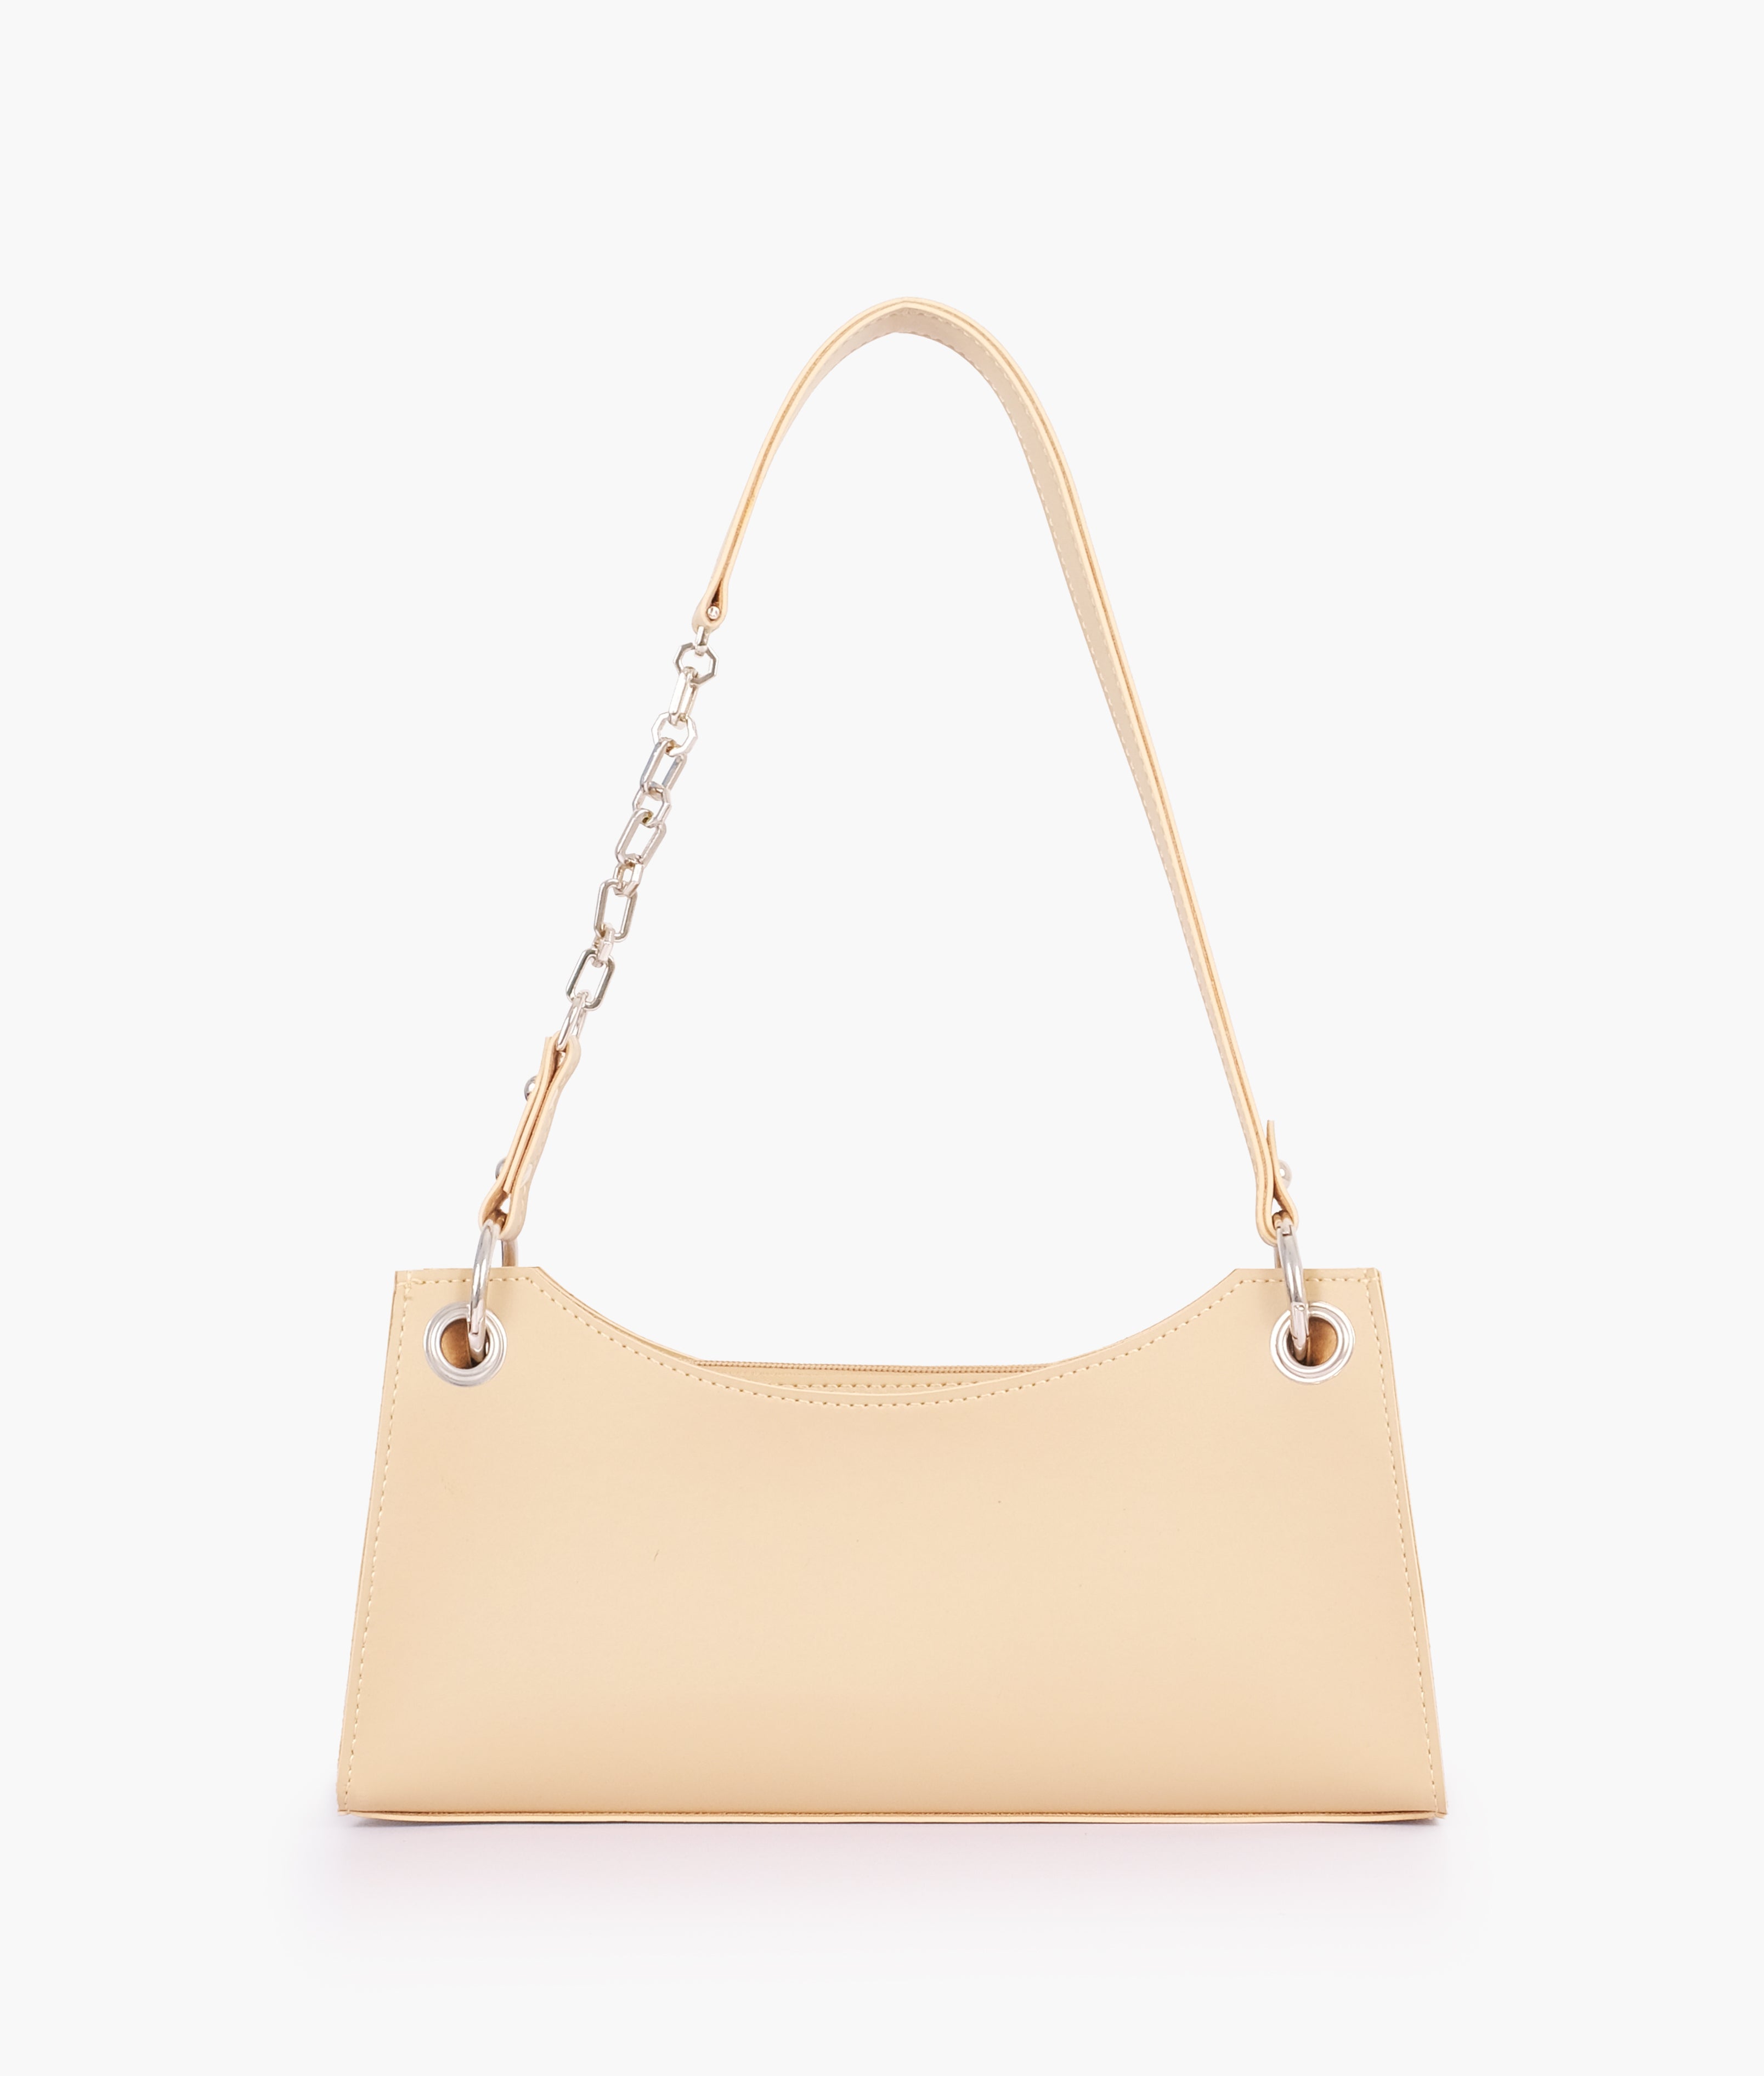 Off-white elongated chain handle purse